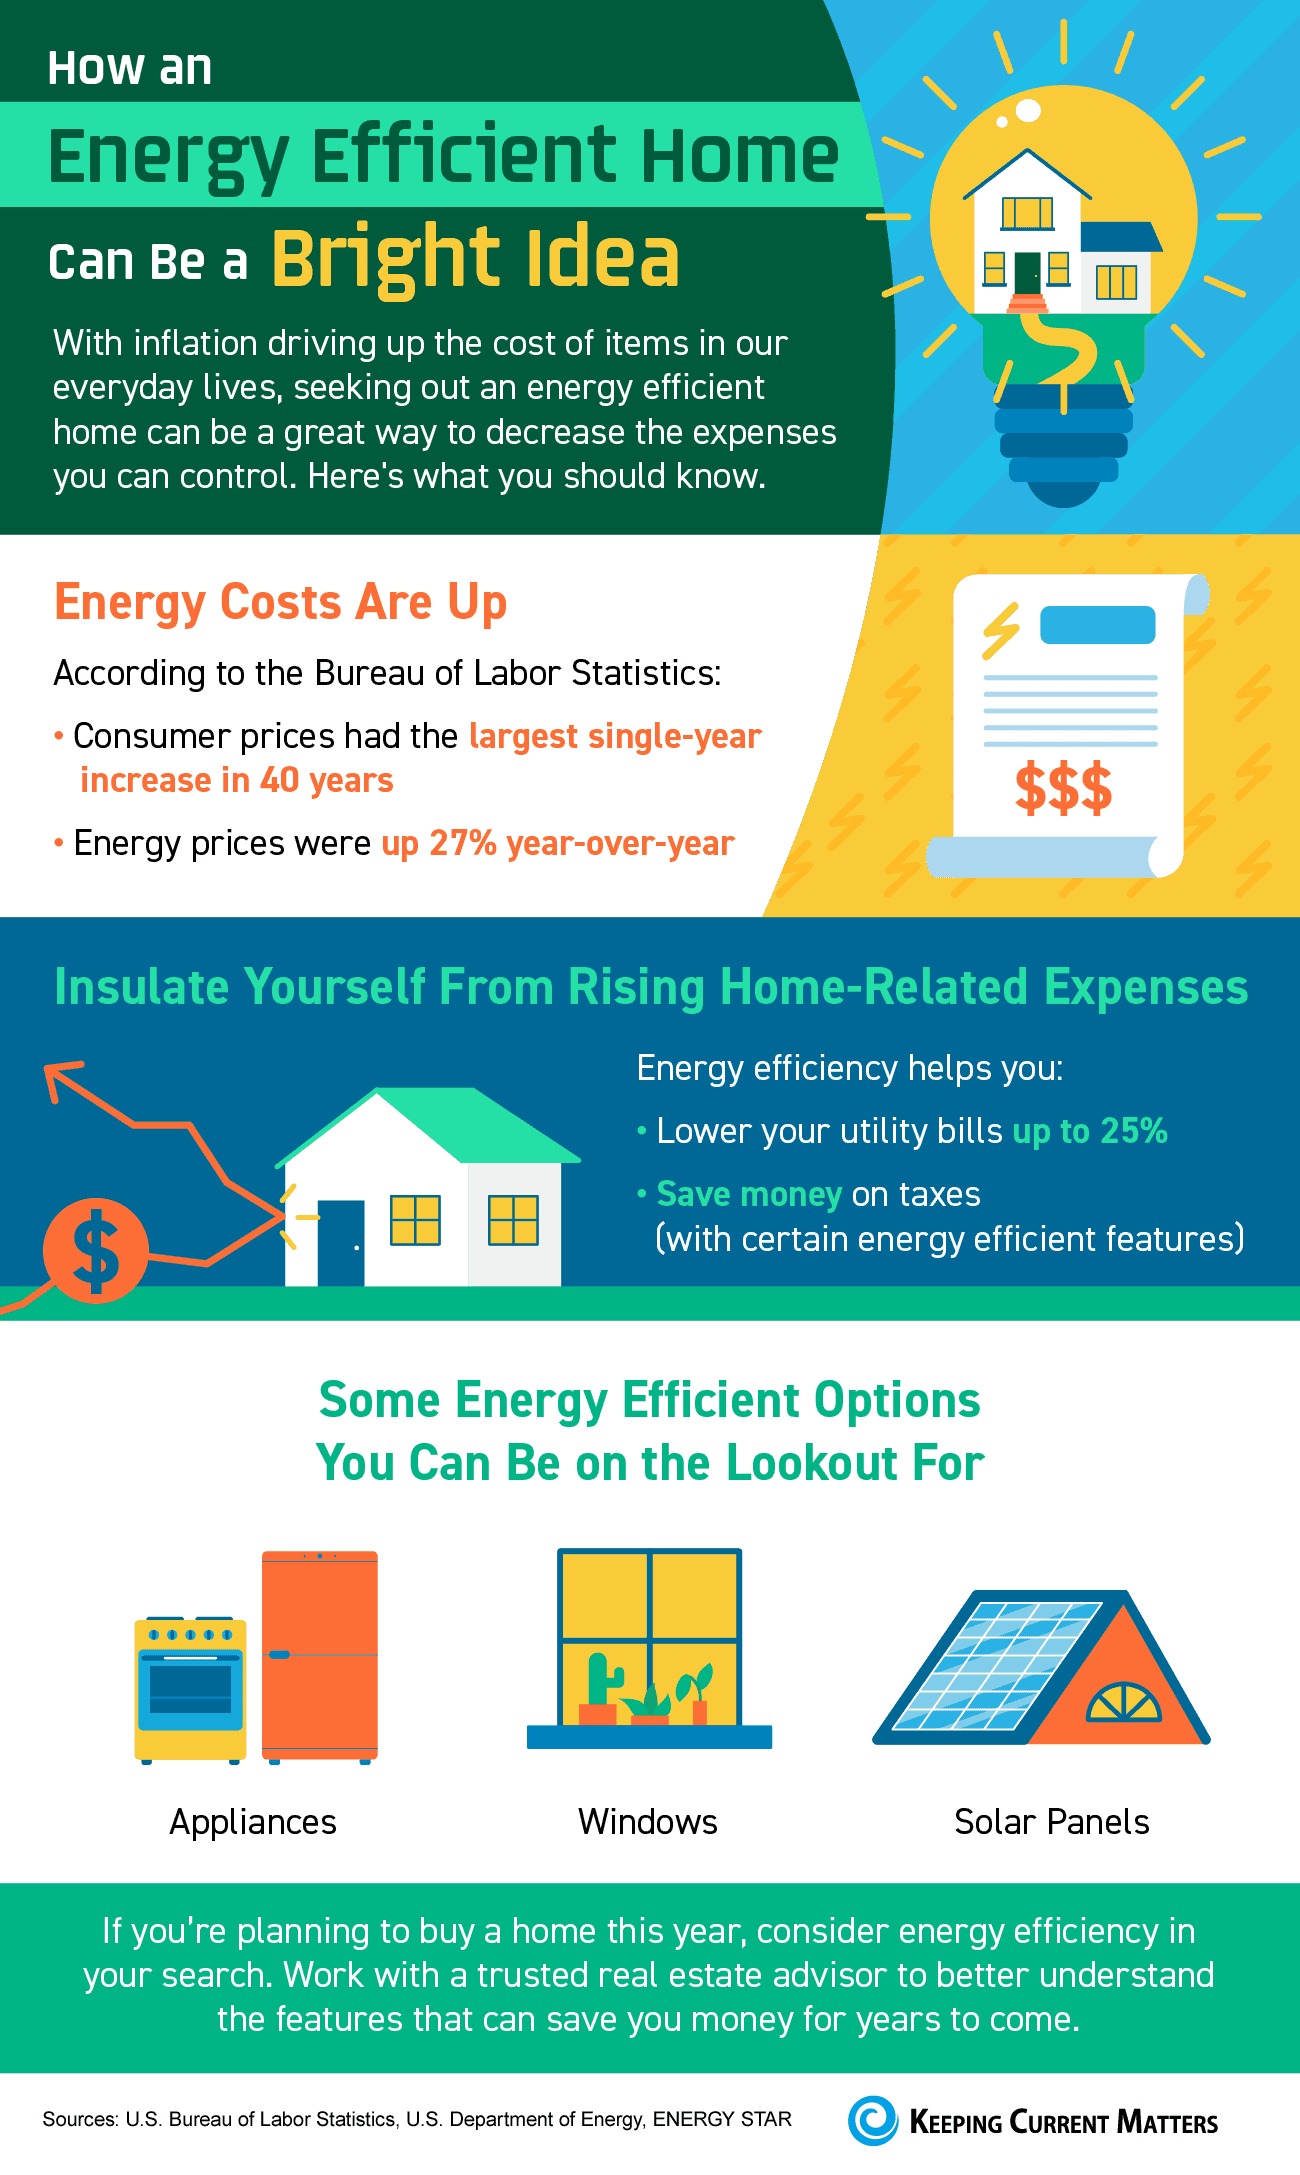 How an Energy Efficient Home Can Be a Bright Idea [INFOGRAPHIC] | Keeping Current Matters